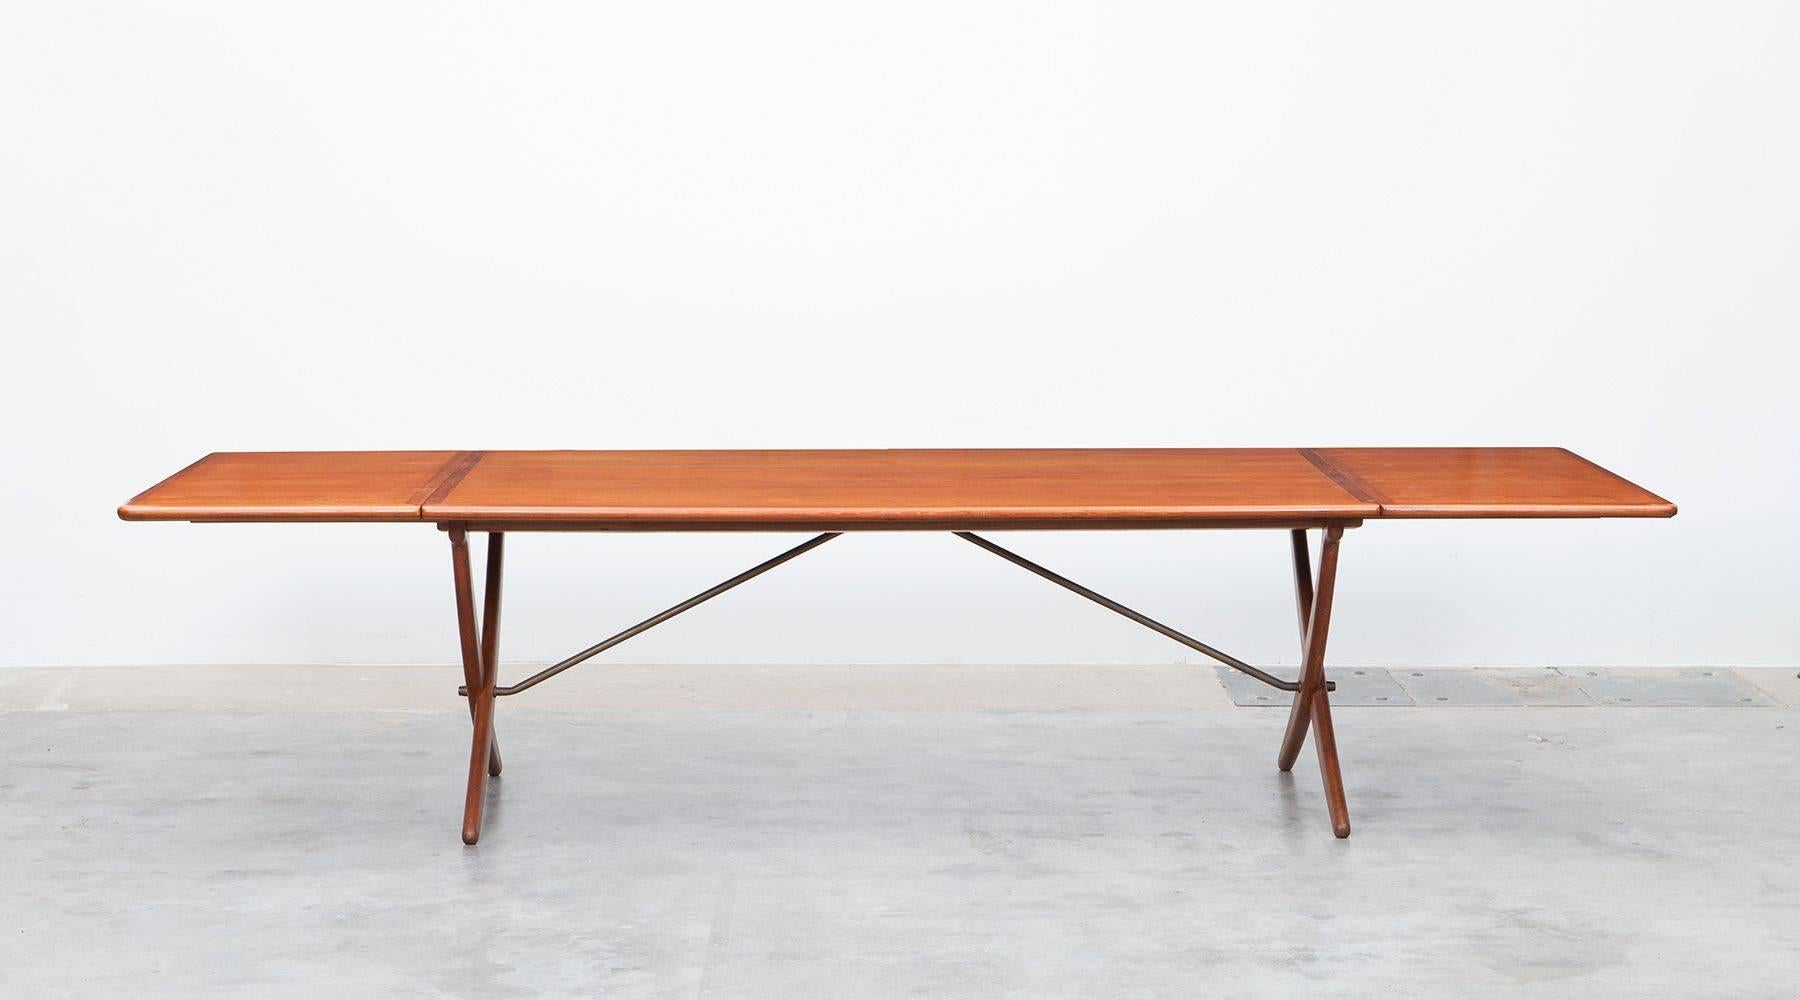 Stunning, solid dining table designed by Hans Wegner comes with a teak top and two wings which can be folded down. The crossed legs construction gives to the table a good stability. The table is extendable to a maximum length of 310 cm. The details